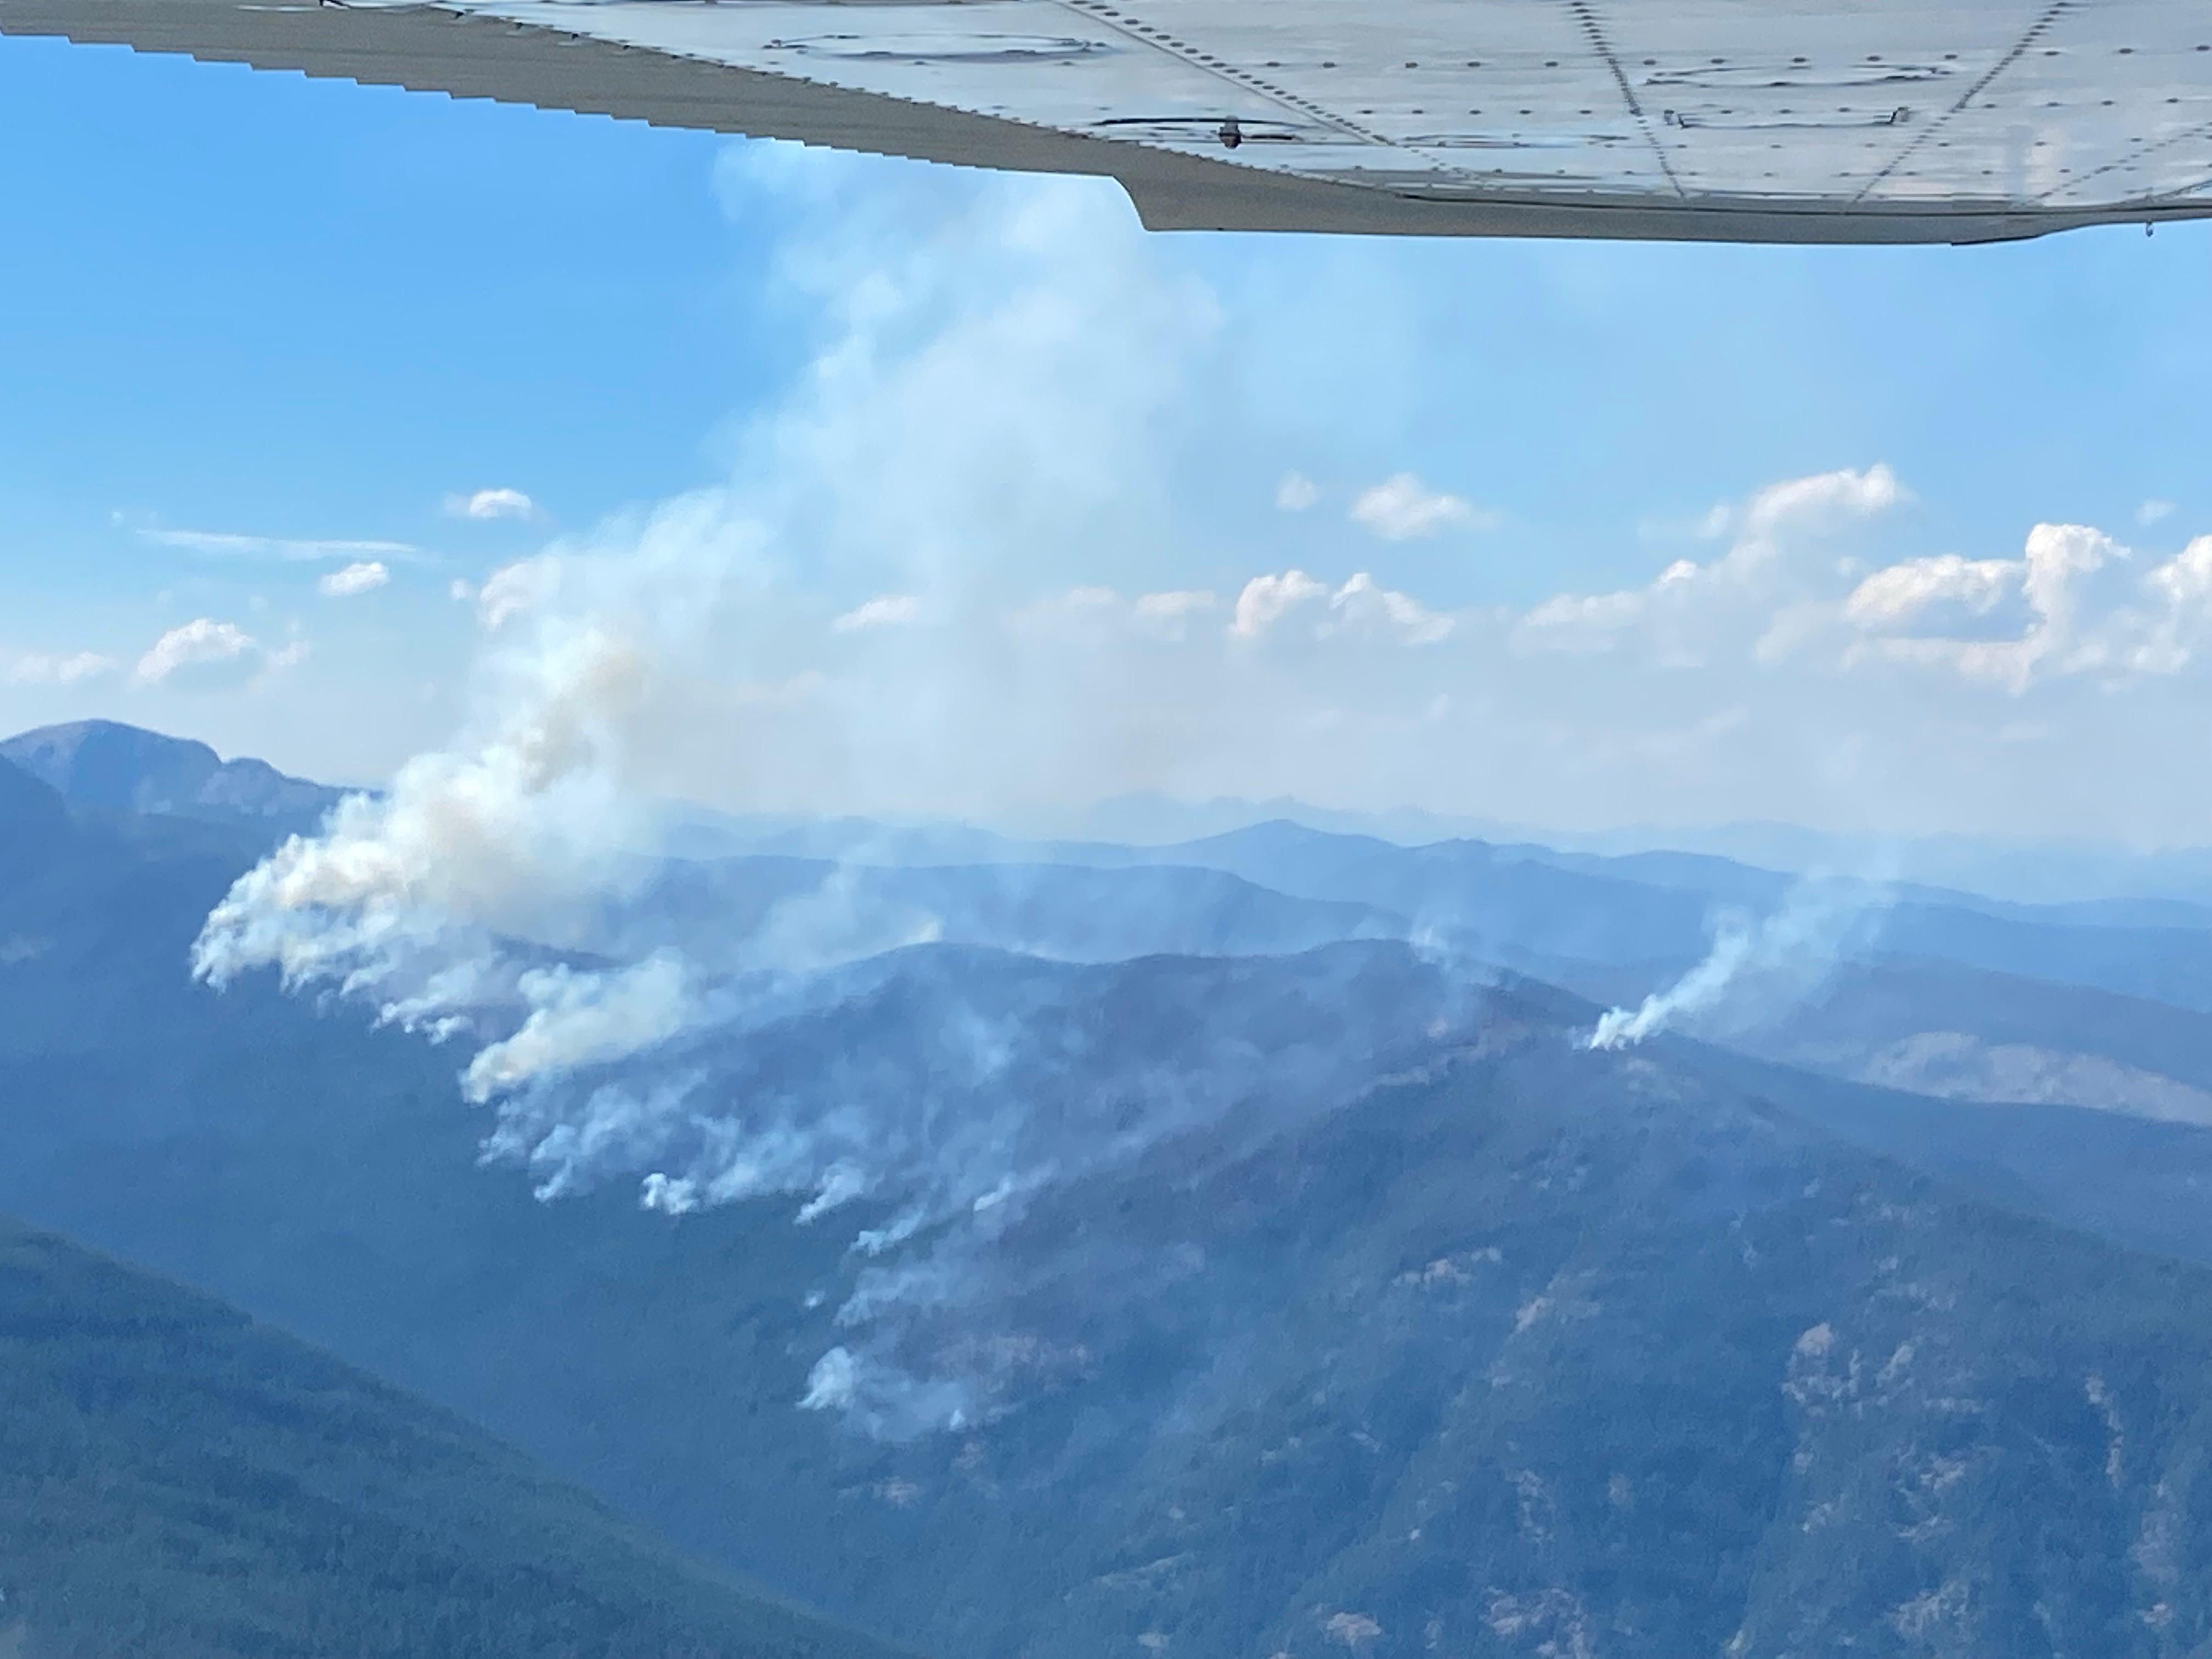 Detection Flight for the Eneas Peak Fire on 8/21/22. Photo Credit: Rob Tomczak